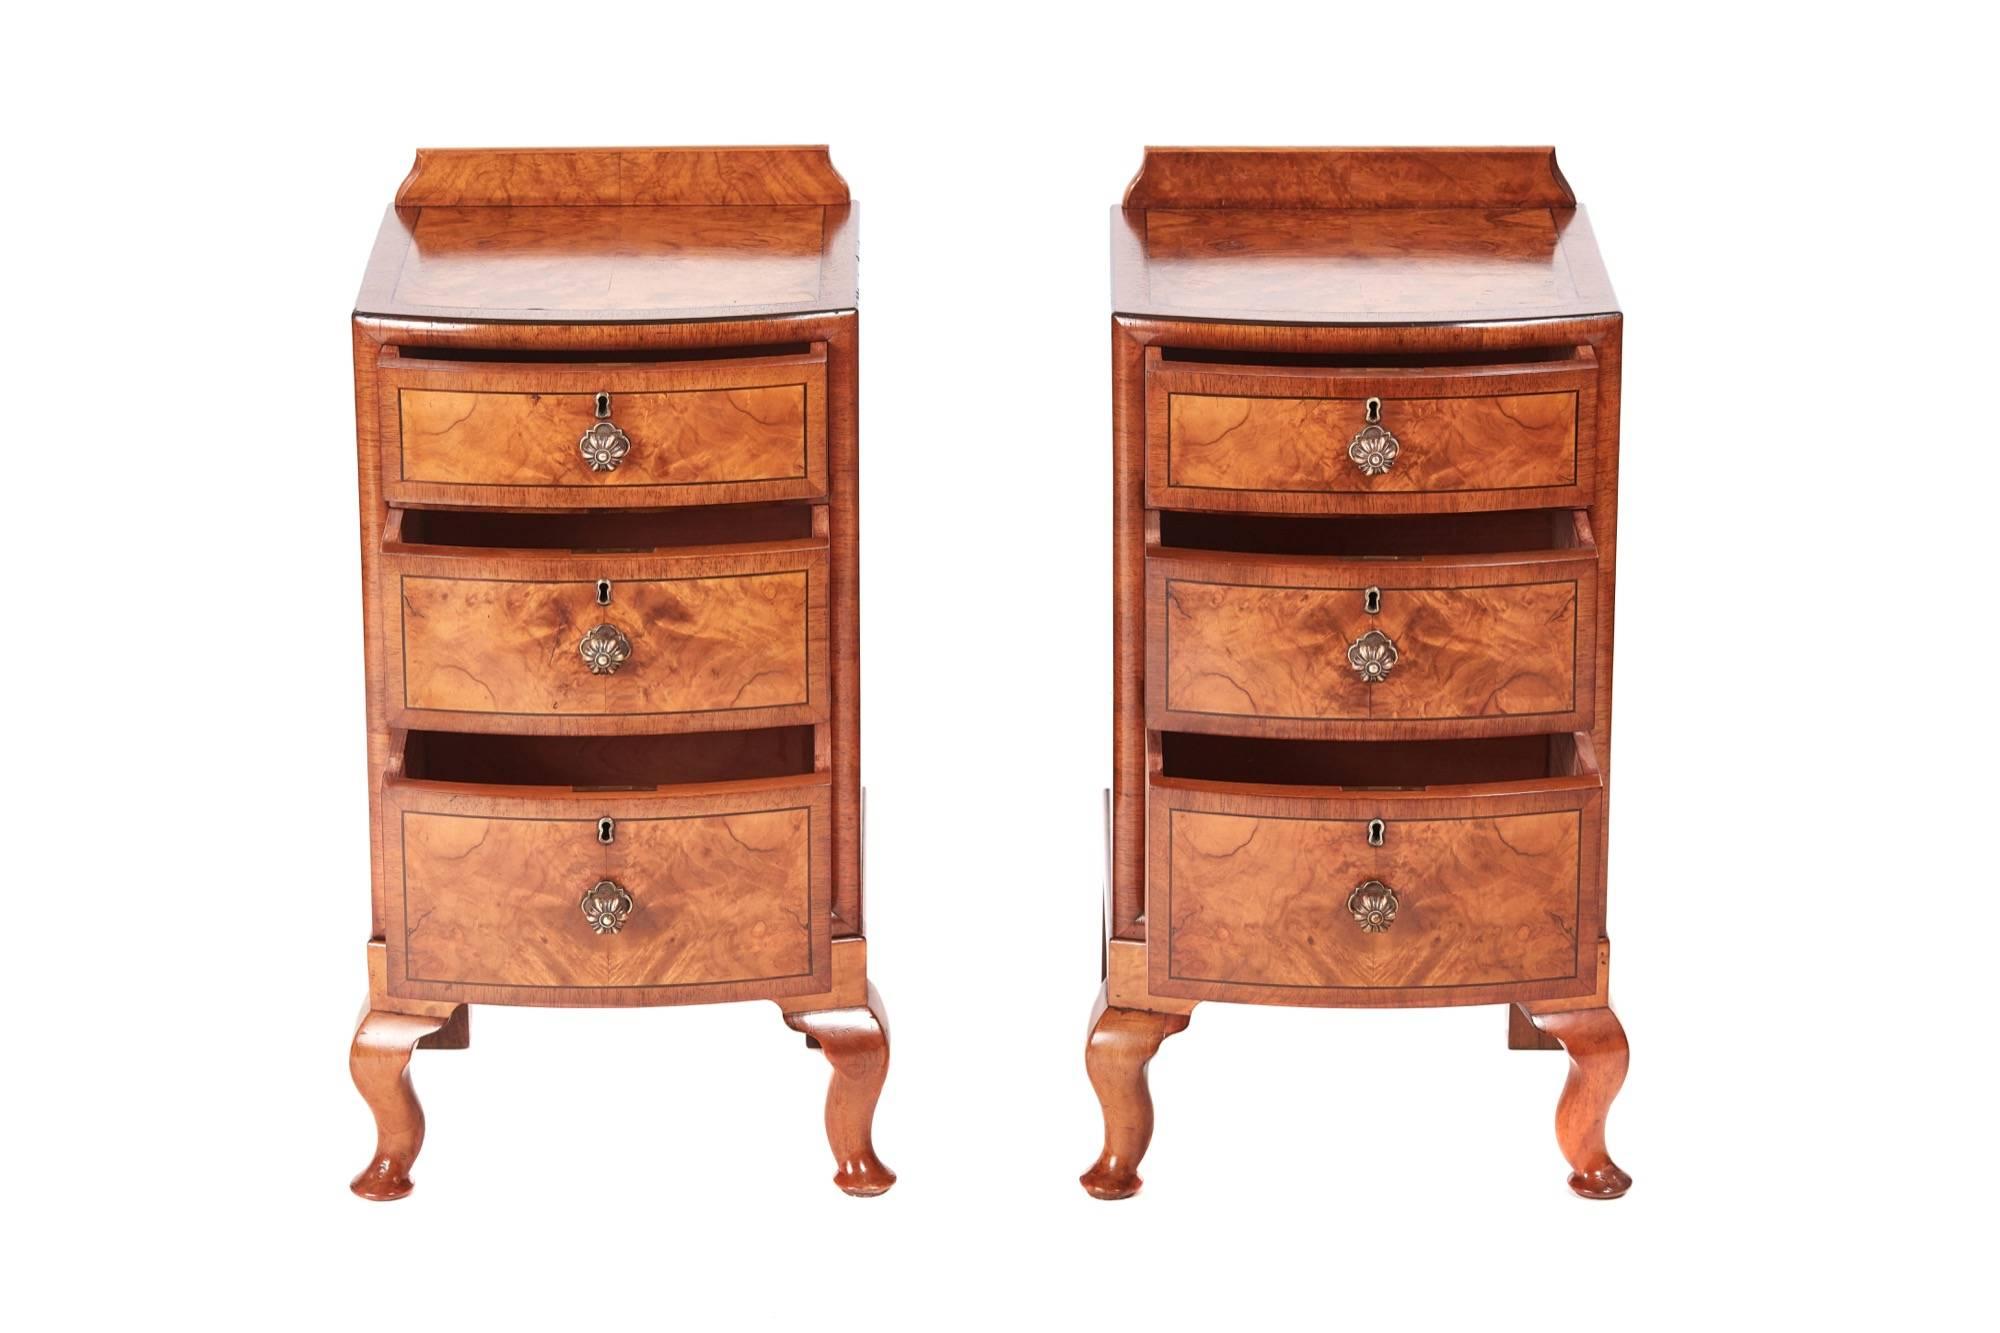 Pair of antique burr walnut bedside cabinets, having fantastic burr walnut bow front tops crossbanded in walnut, three bow front drawers crossbanded in walnut with original brass handles, standing on short cabriole legs with pad feet
Fantastic